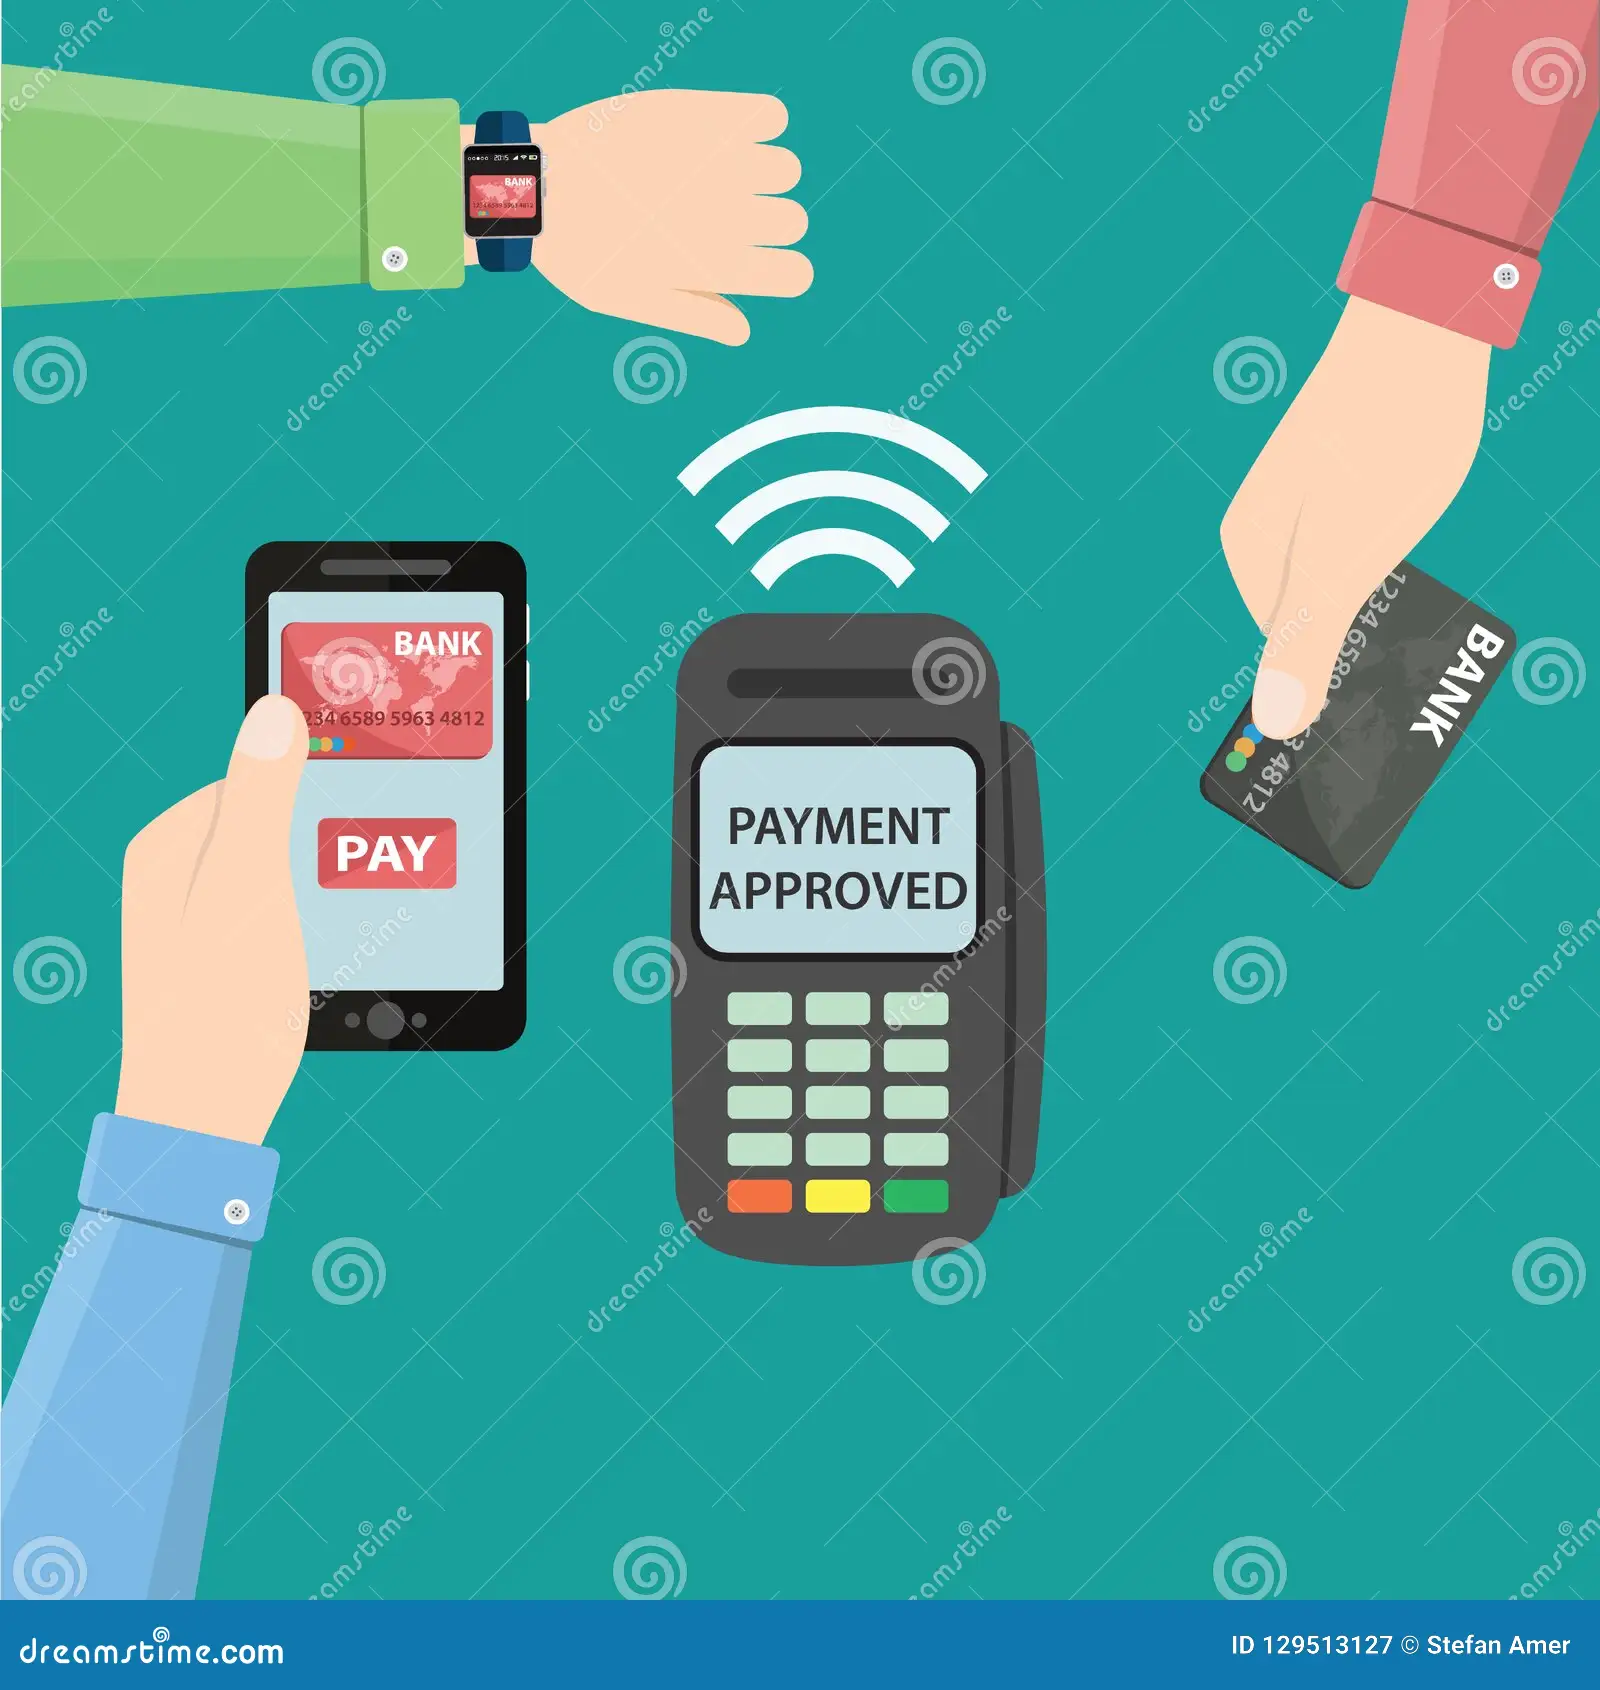 wireless-payments